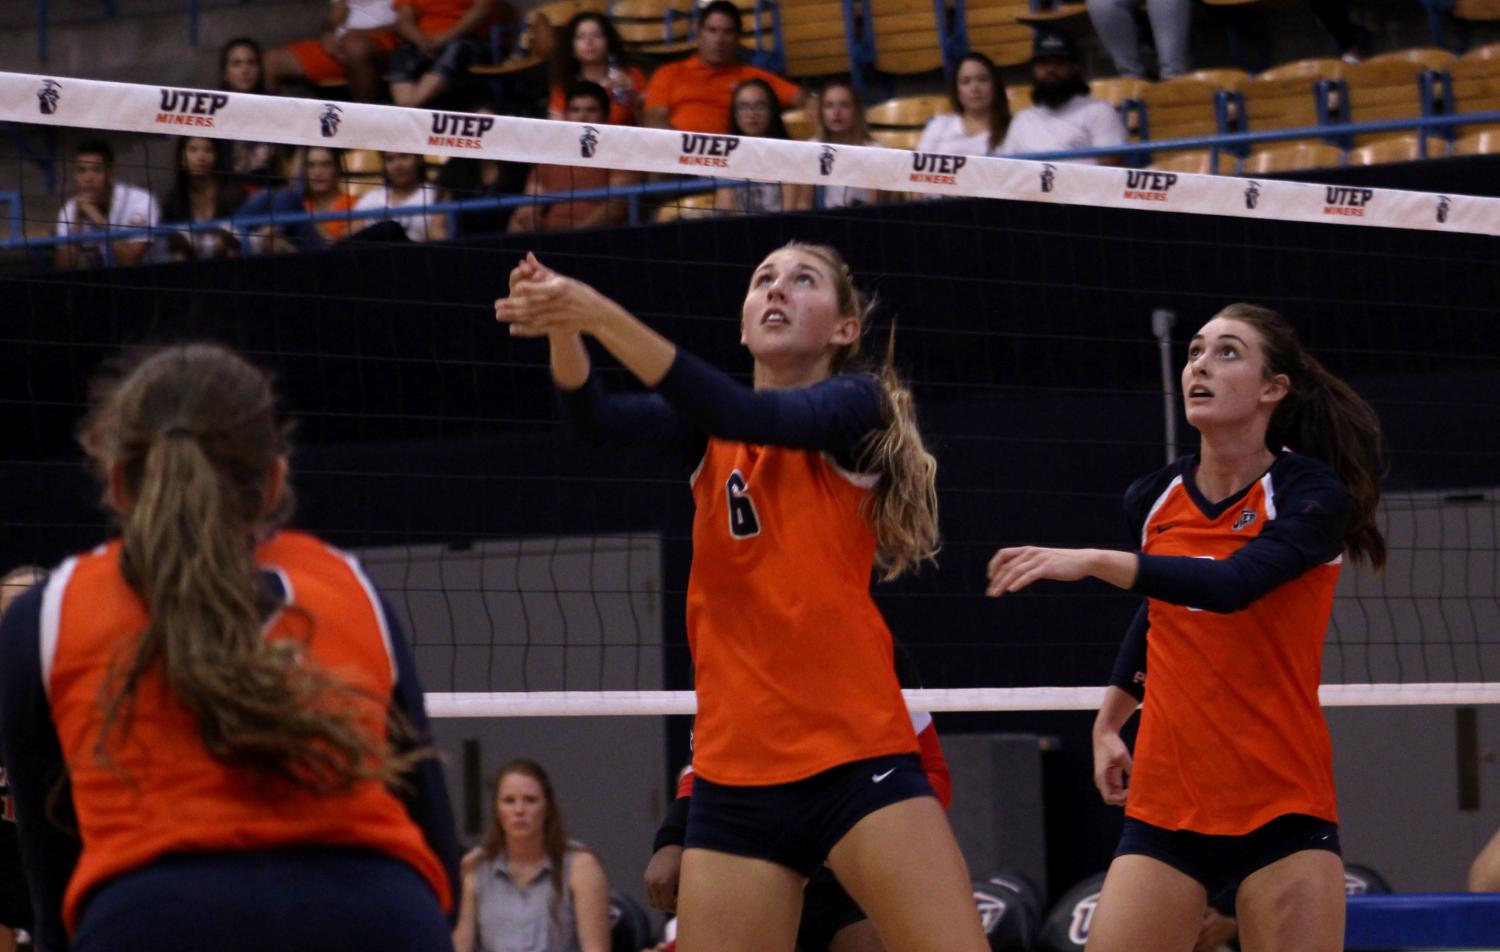 Women%E2%80%99s+volleyball+falls+to+0-3+after+loss+to+Texas+Tech+in+home+opener